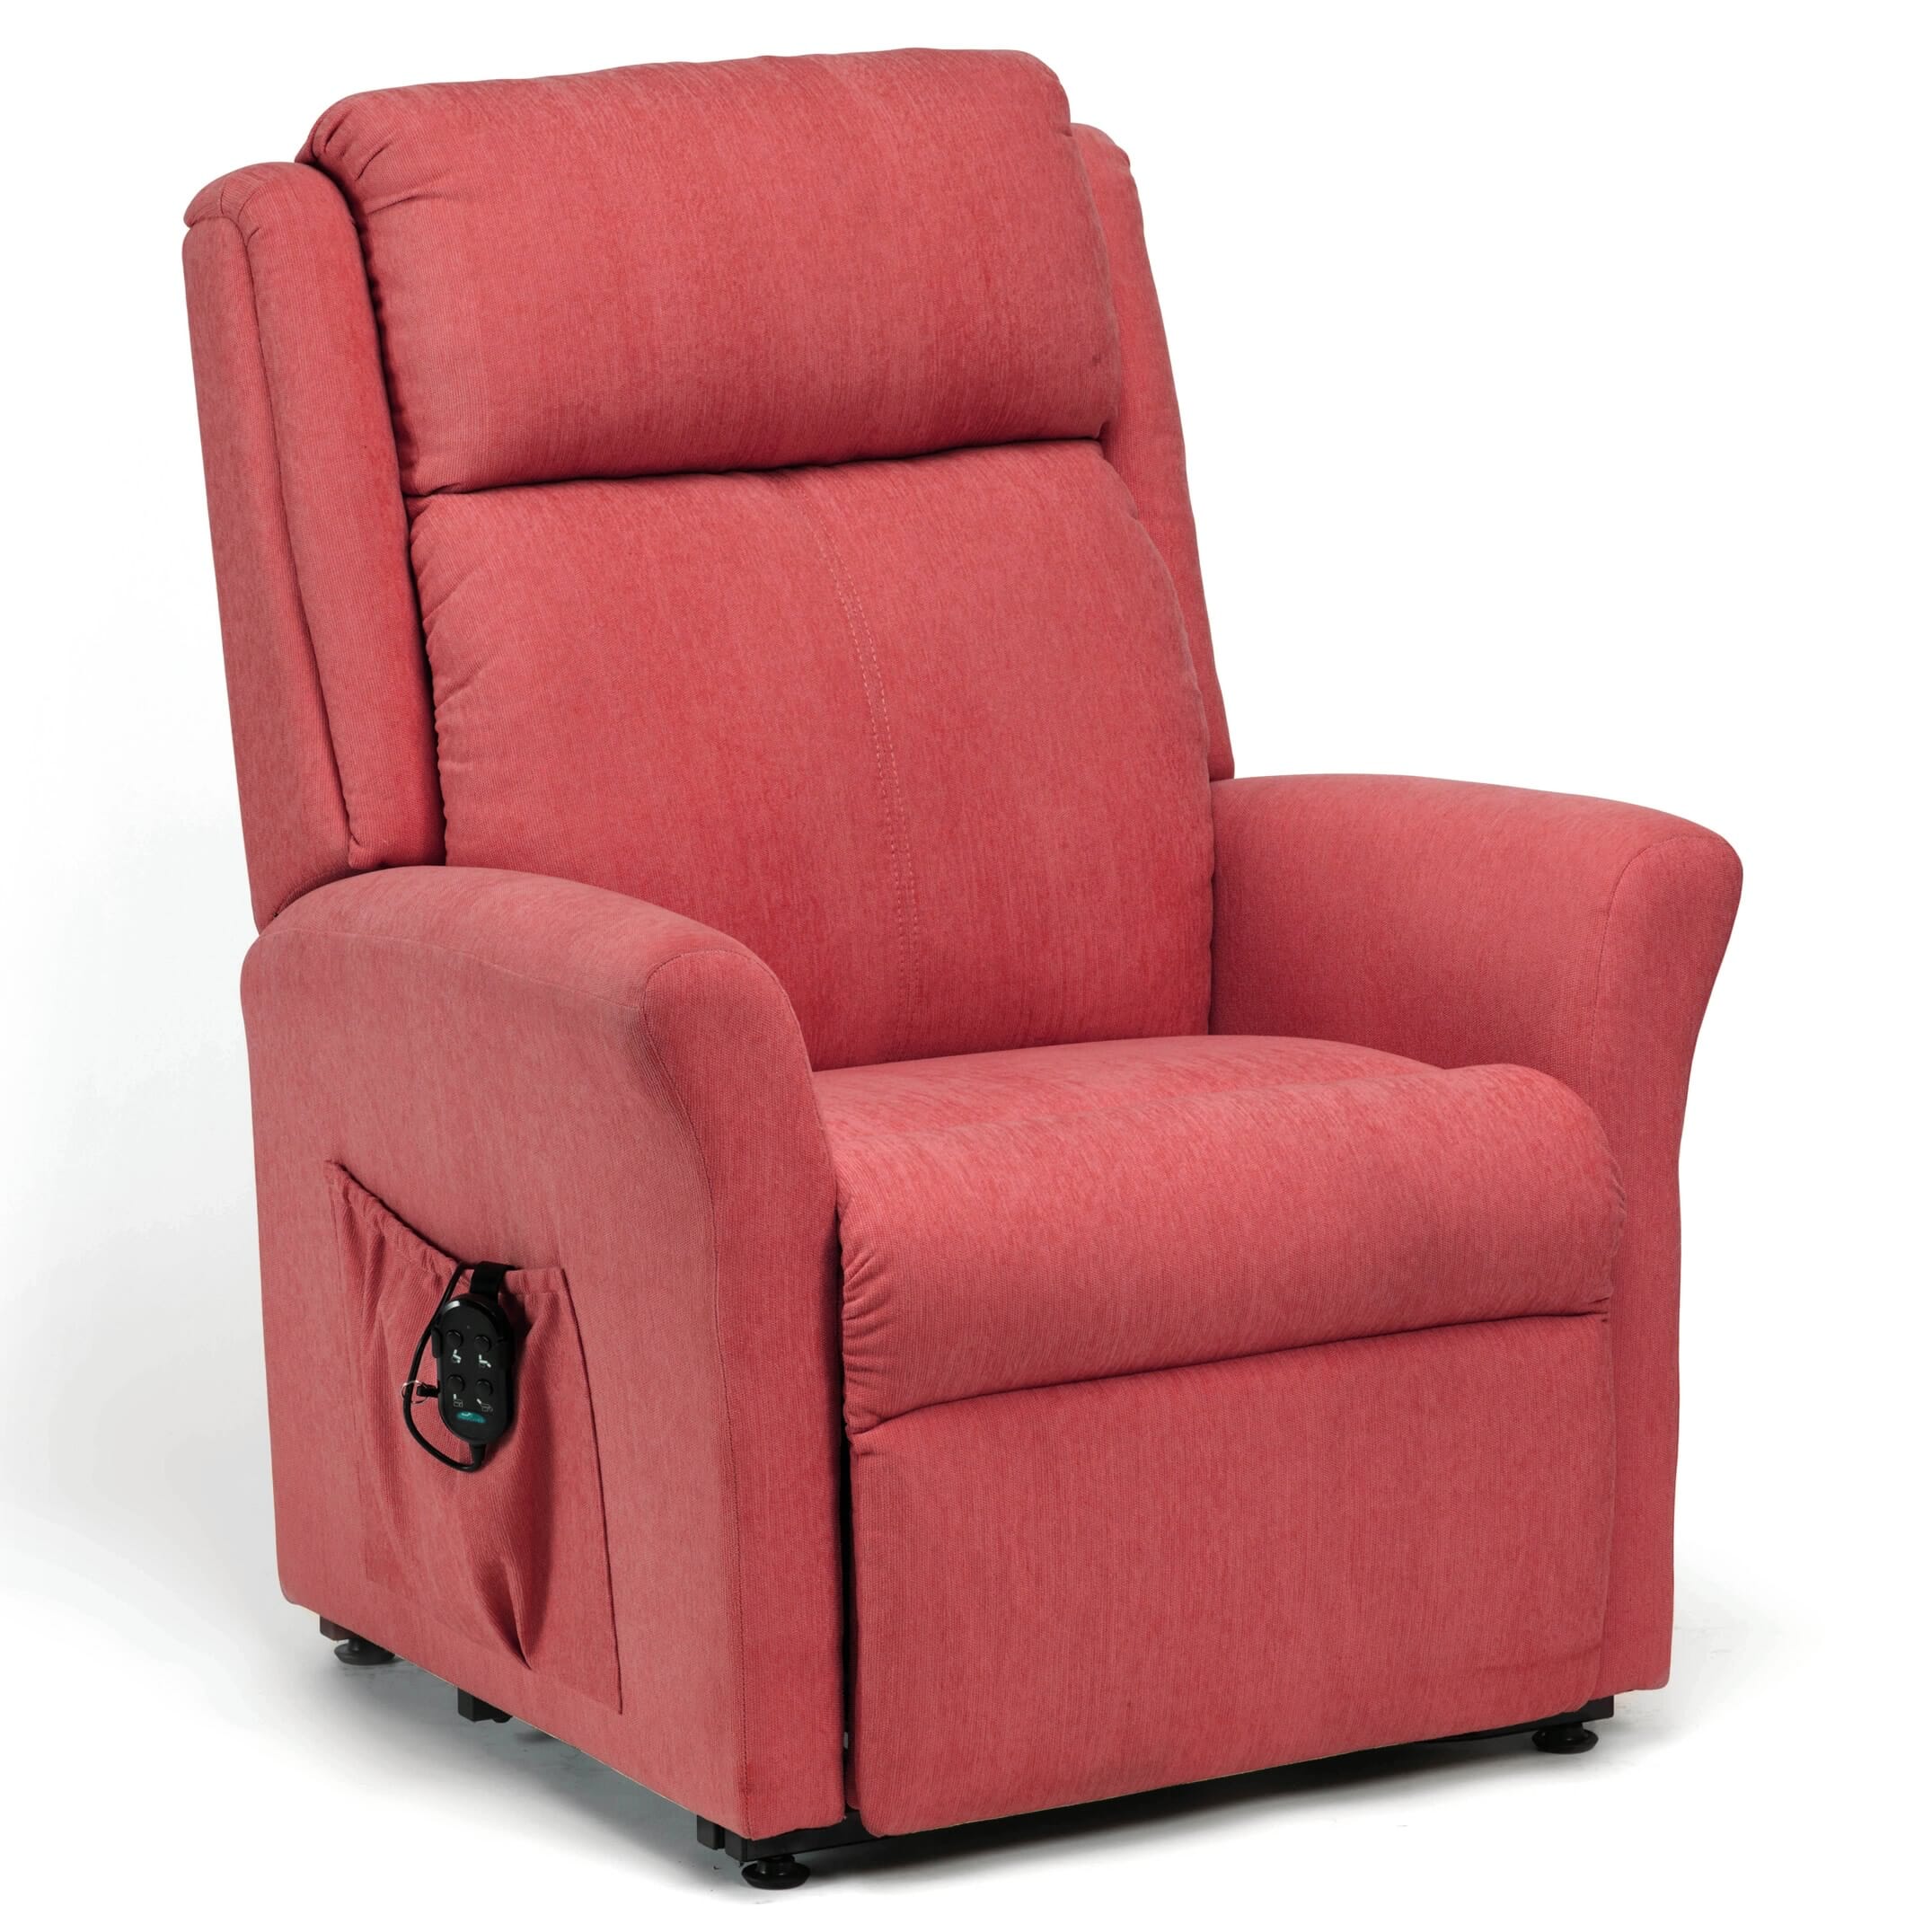 View Petite Memphis Luxury Dual Motor Riser Recliner Chair Berry Red information